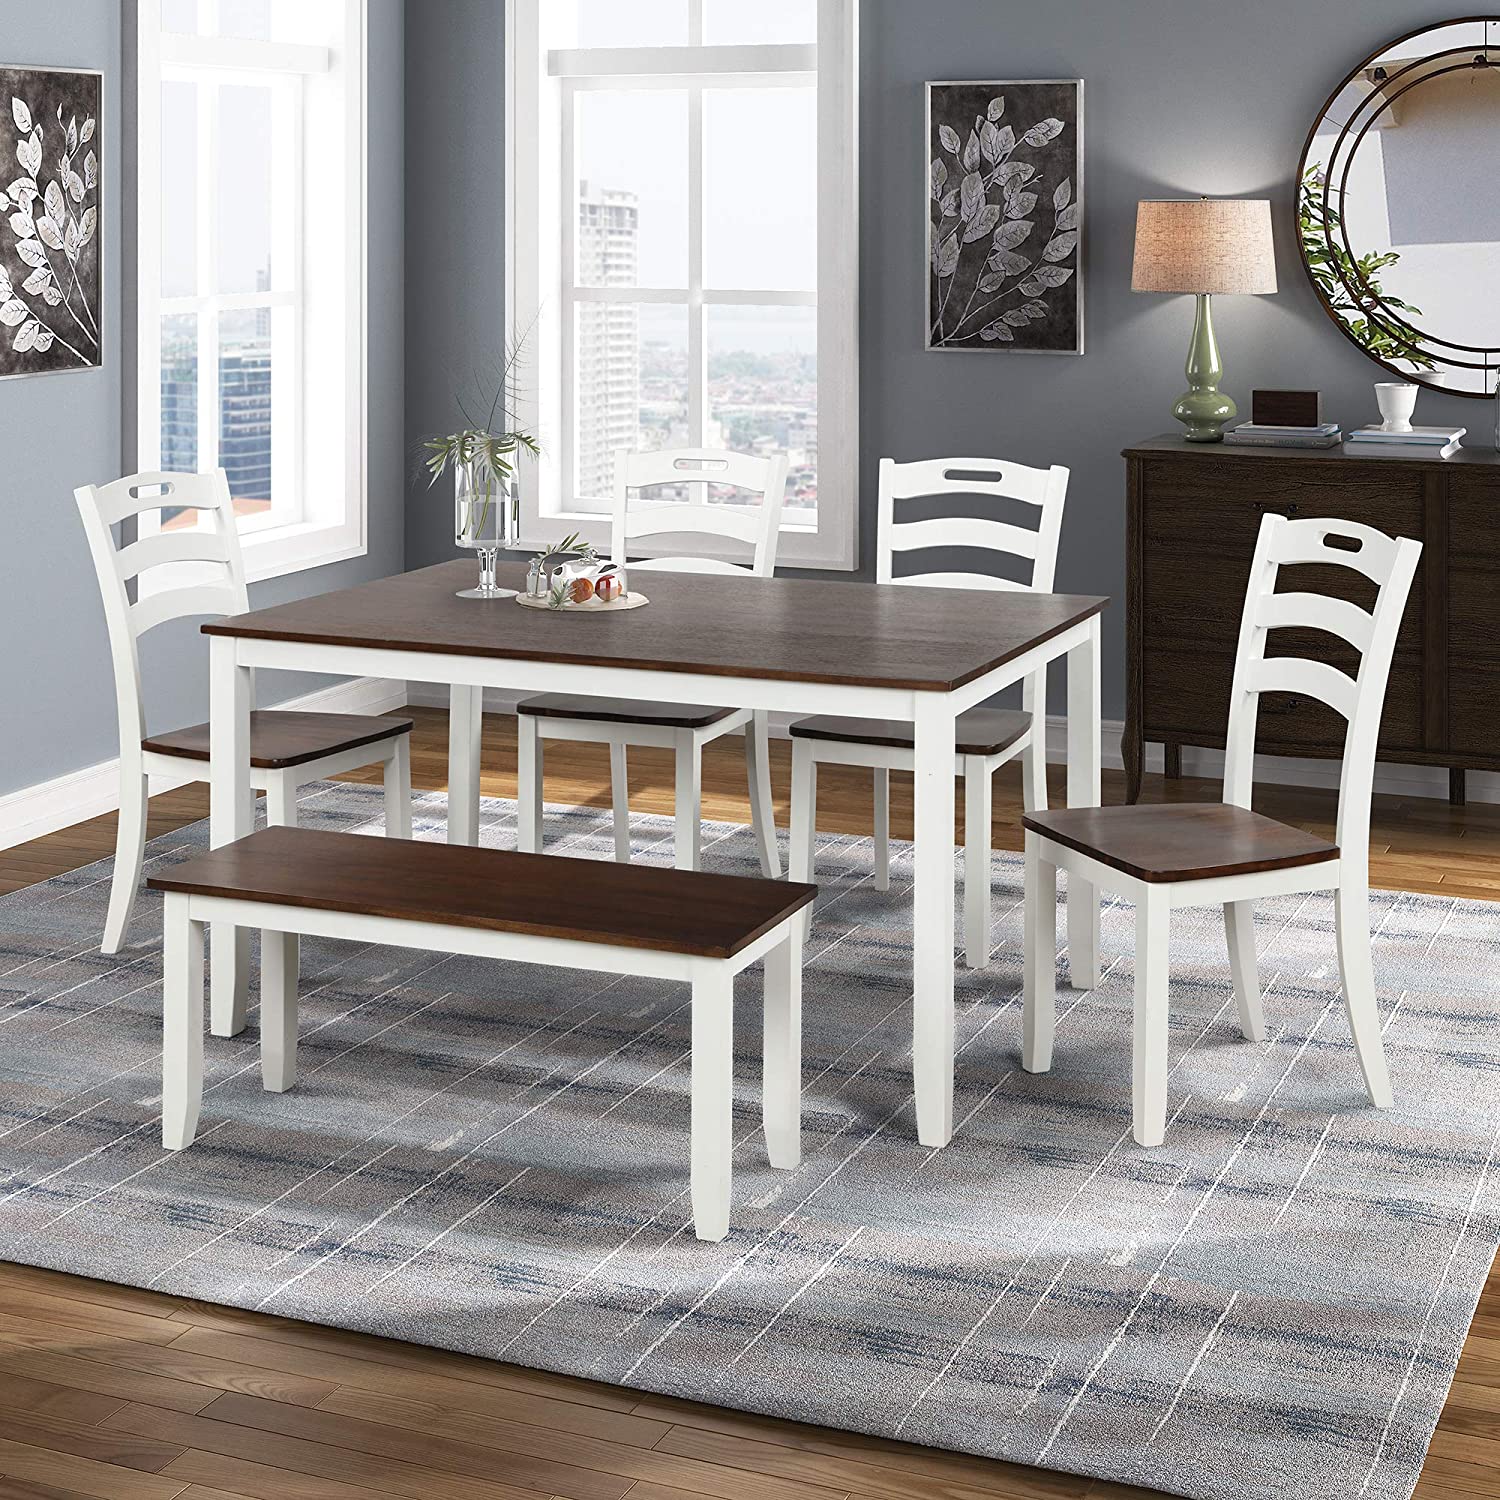 Harper & Bright Designs 6-Piece Dining Table Set with Bench